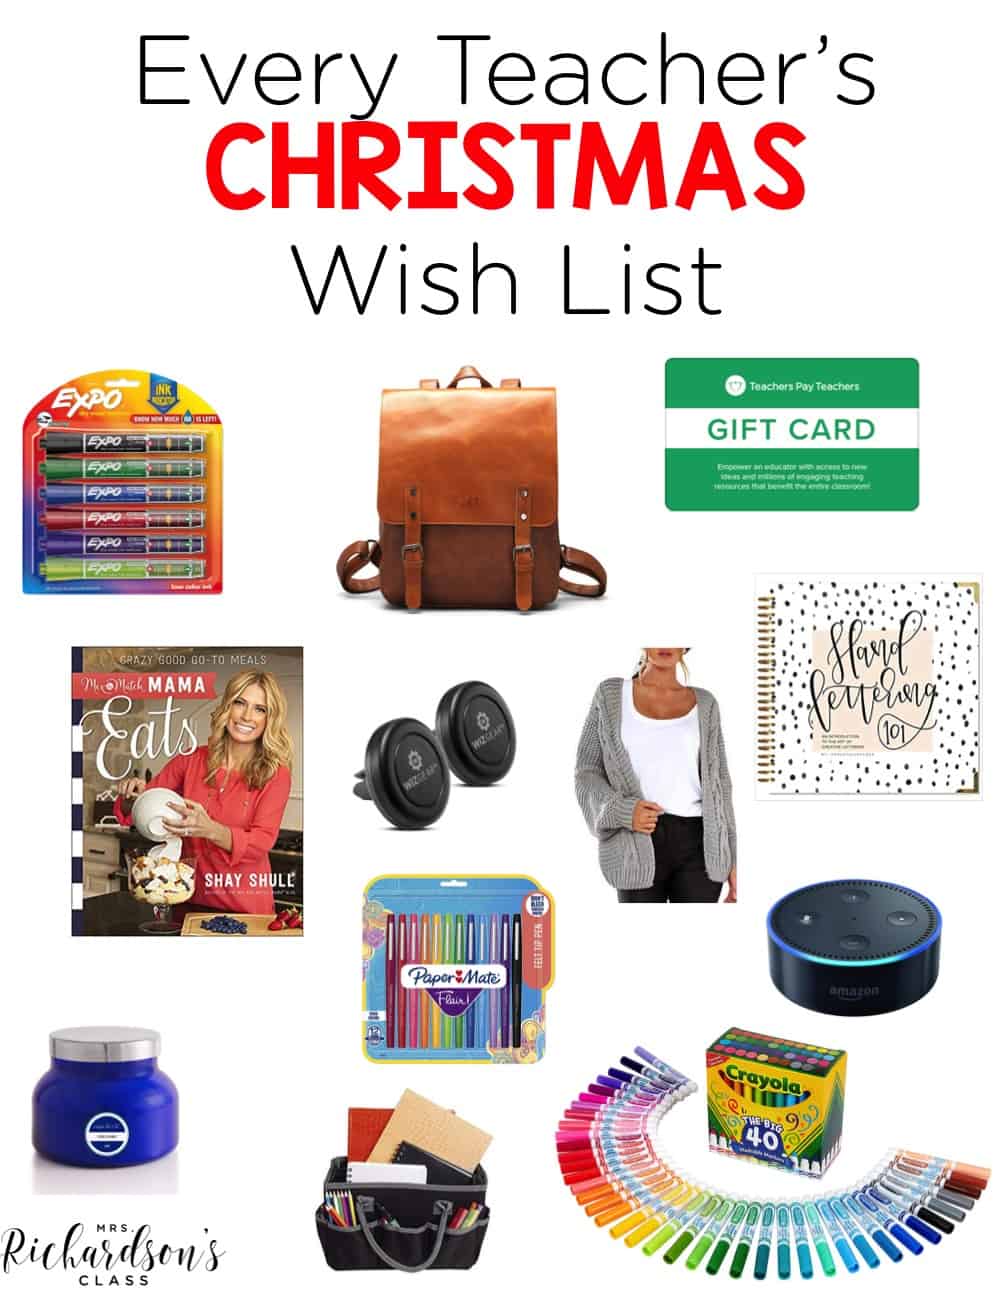 Things to put on your wishlist